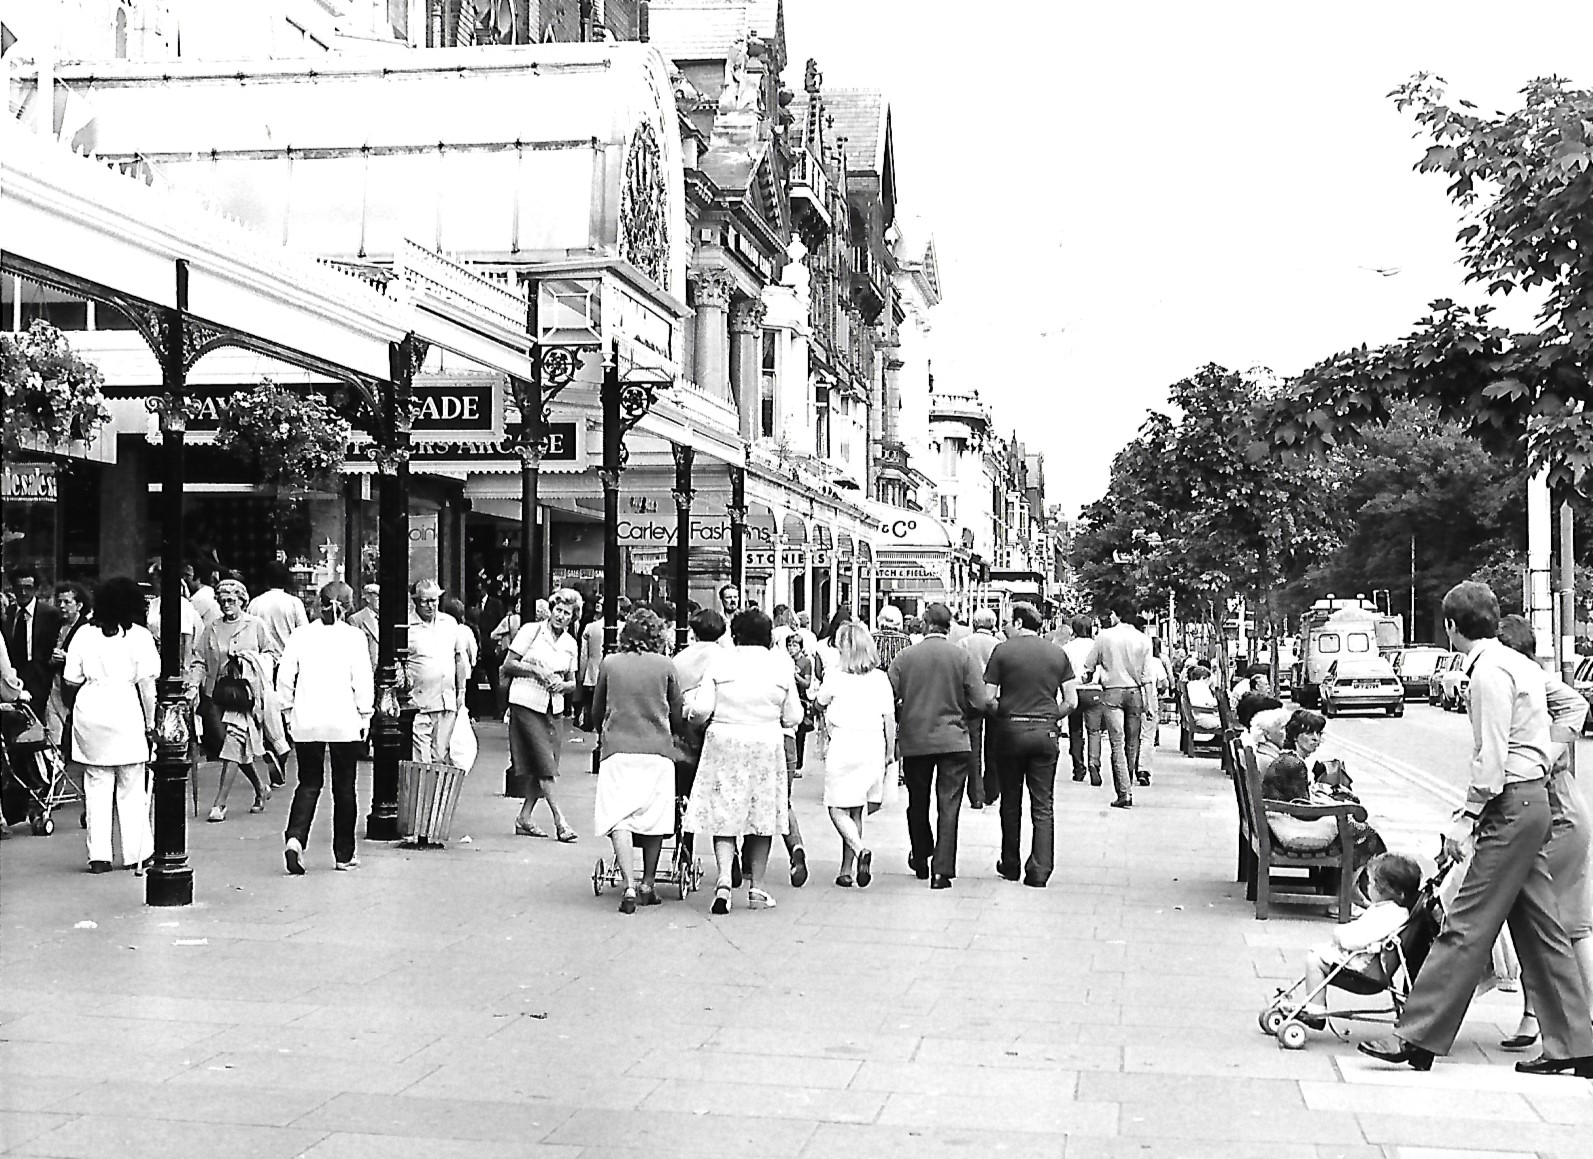 Lord Street in Southport, including Wayfarers Shopping Arcade, in April 1983